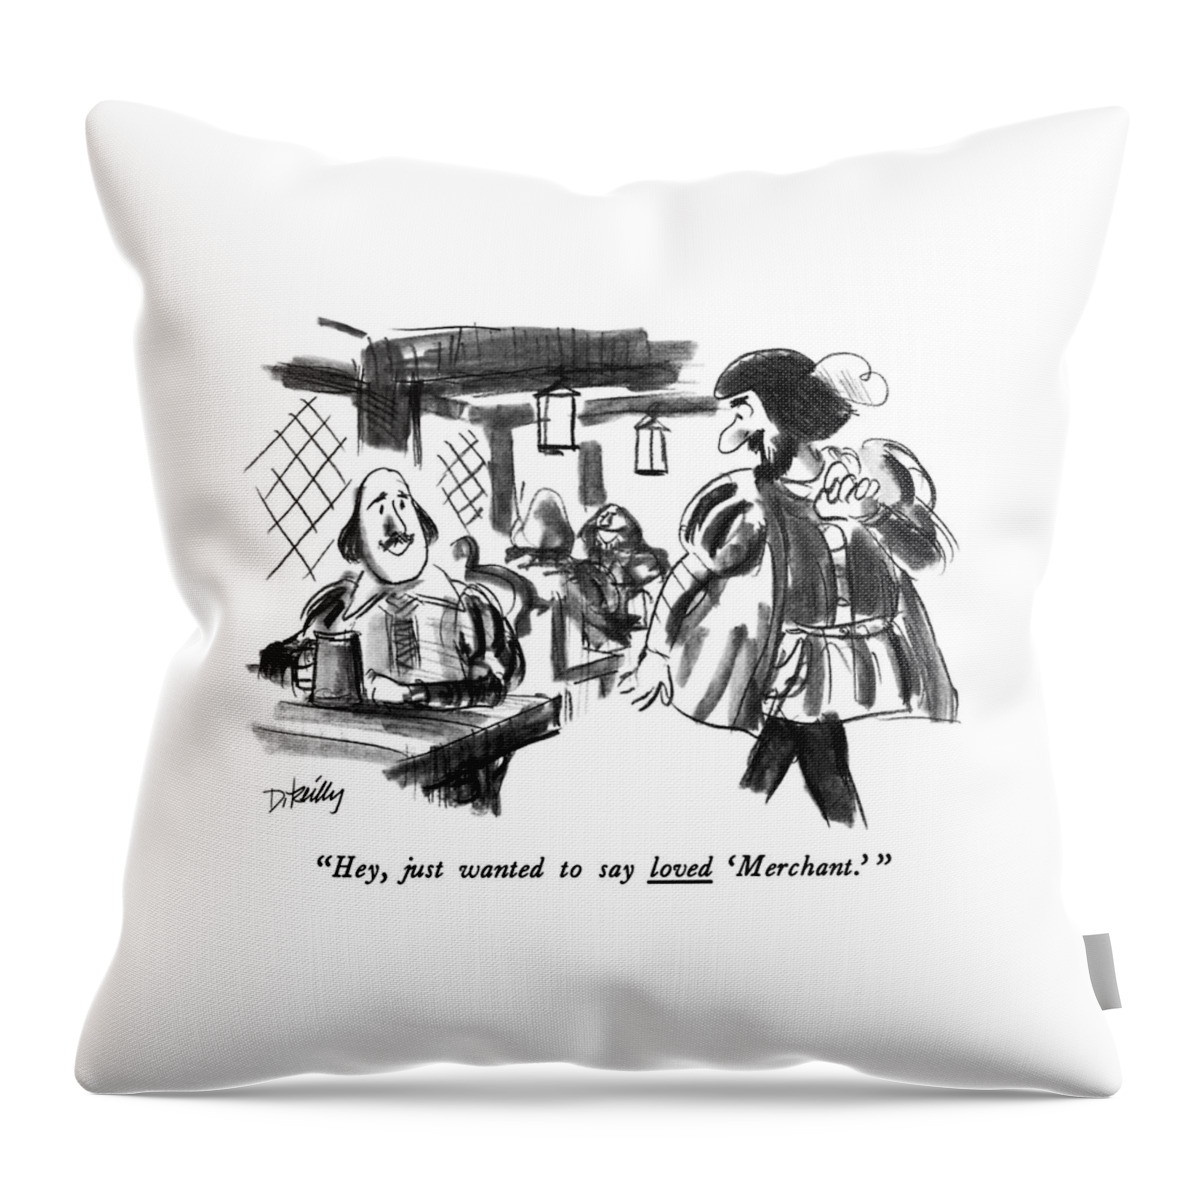 Hey, Just Wanted To Say Loved 'merchant.' Throw Pillow